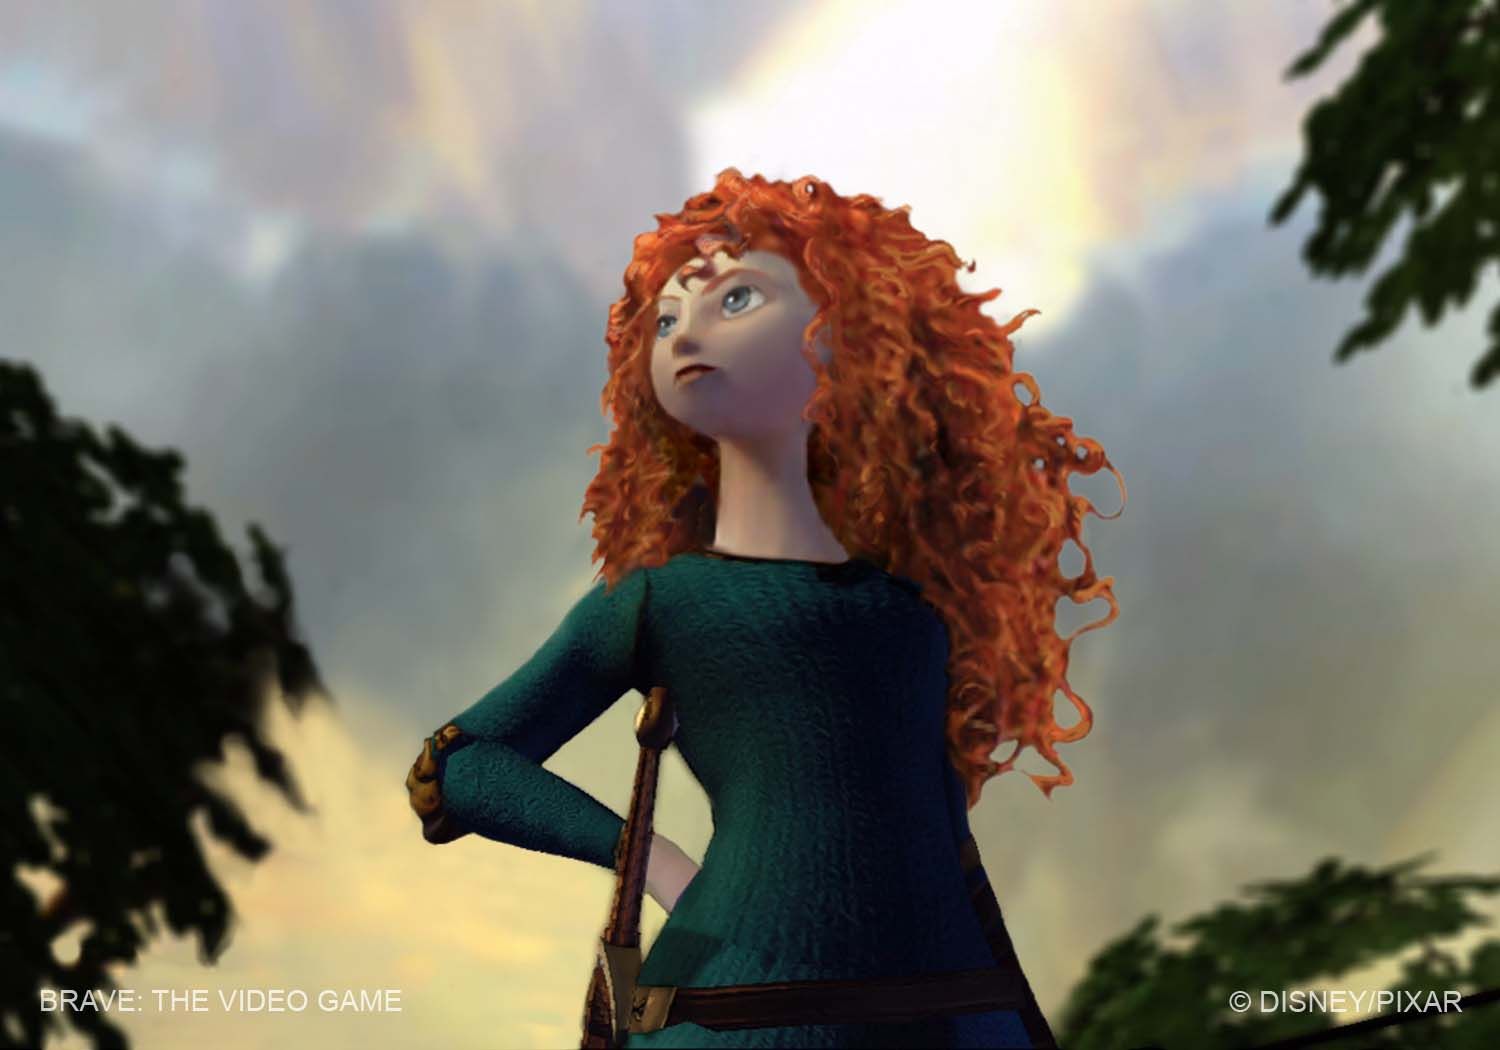 Brave: The Video Game Review